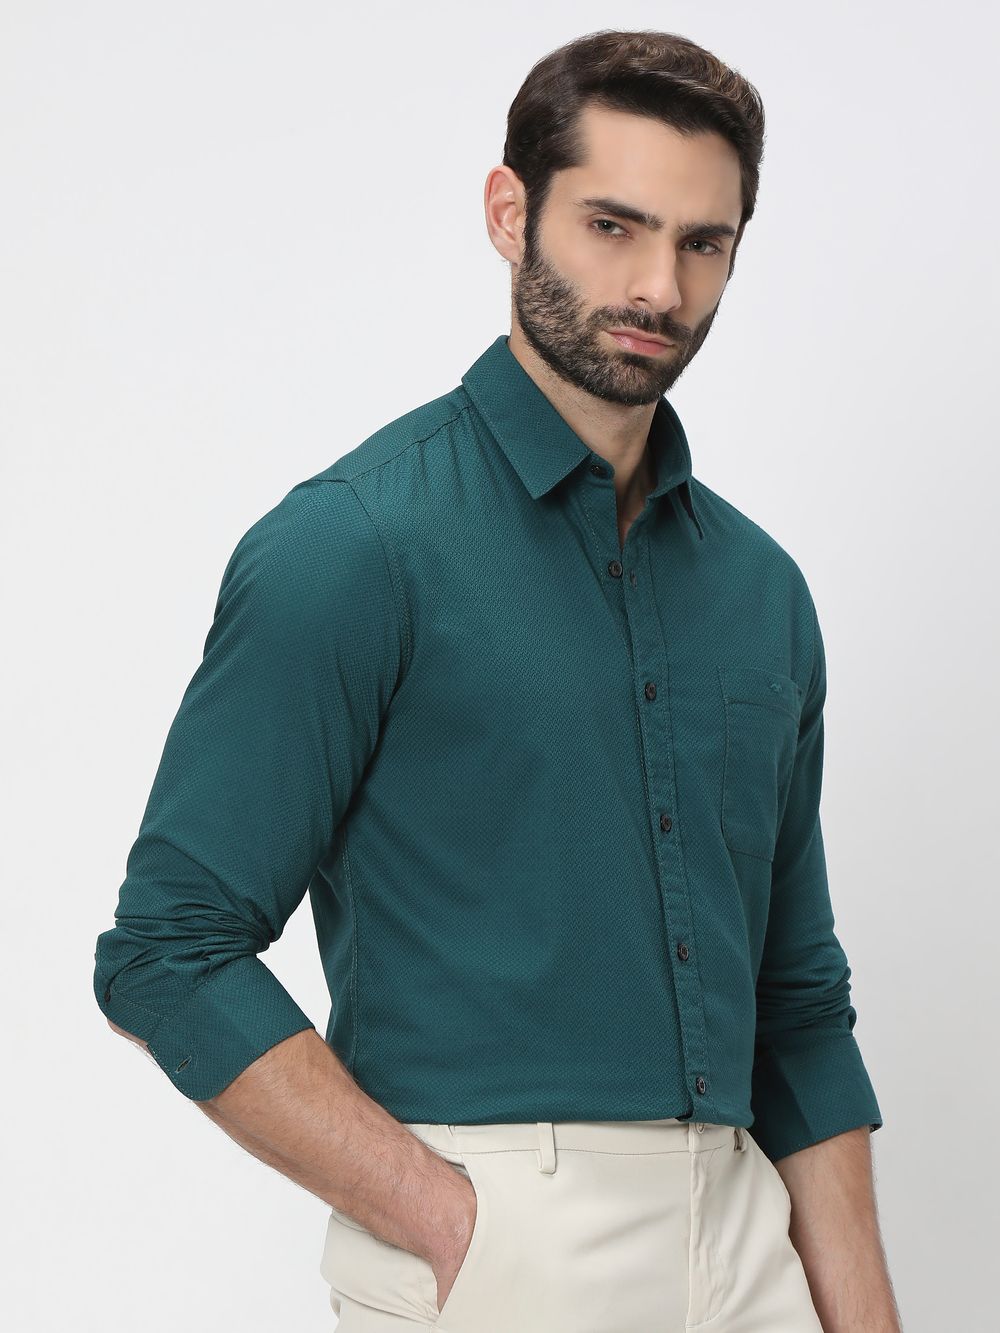 Green Dobby Slim Fit Casual Shirt